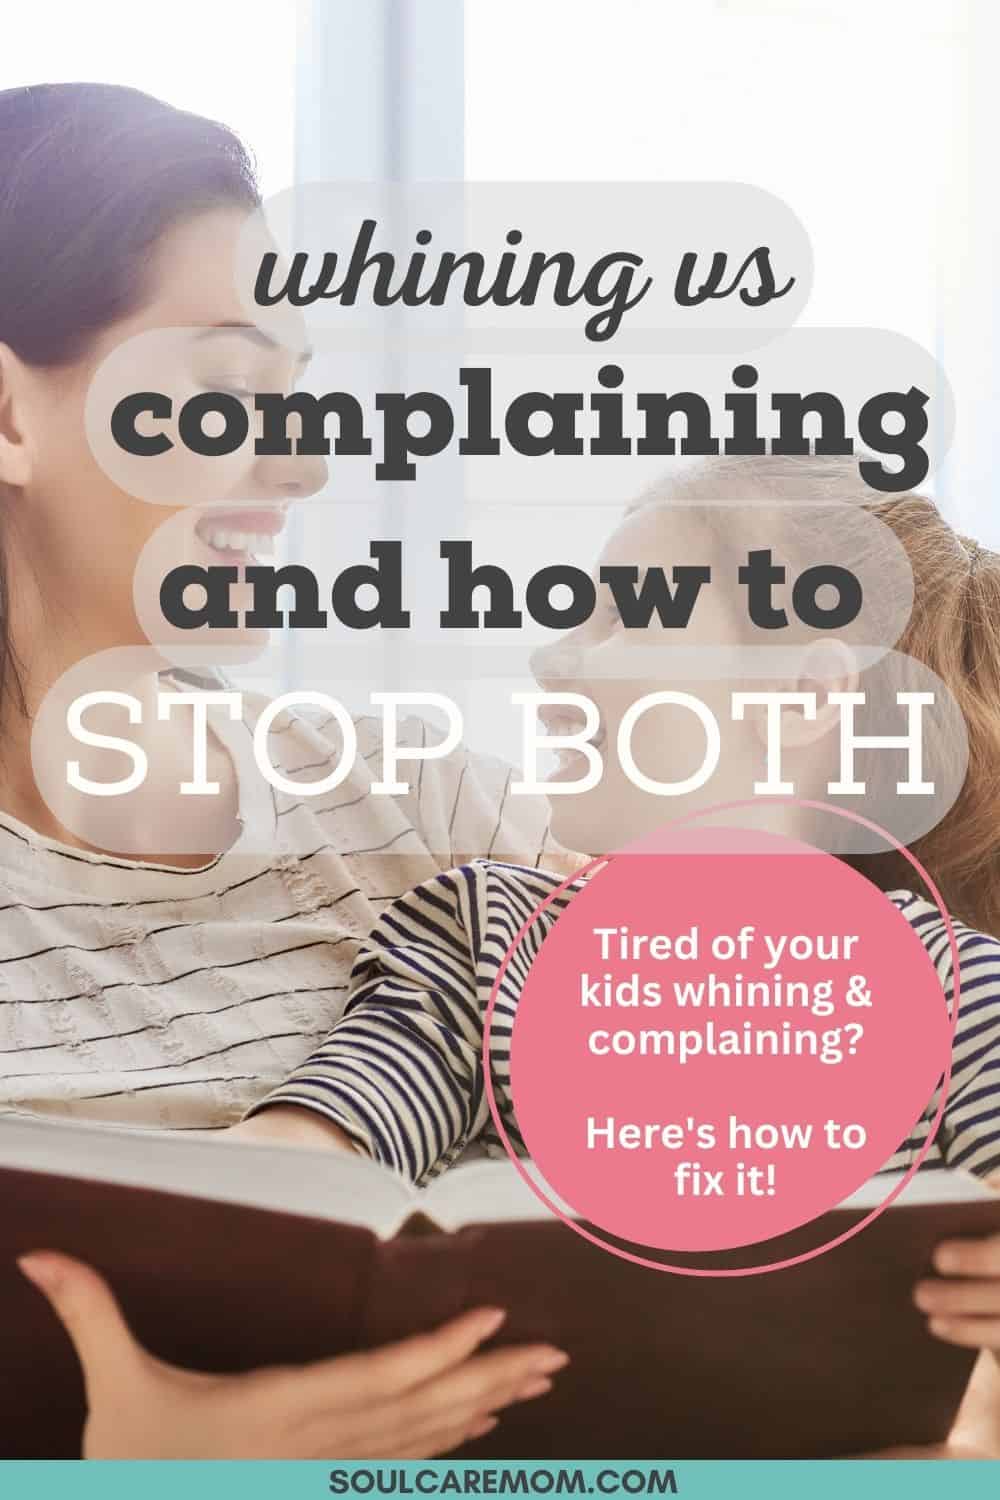 whining vs complaining and how to stop both